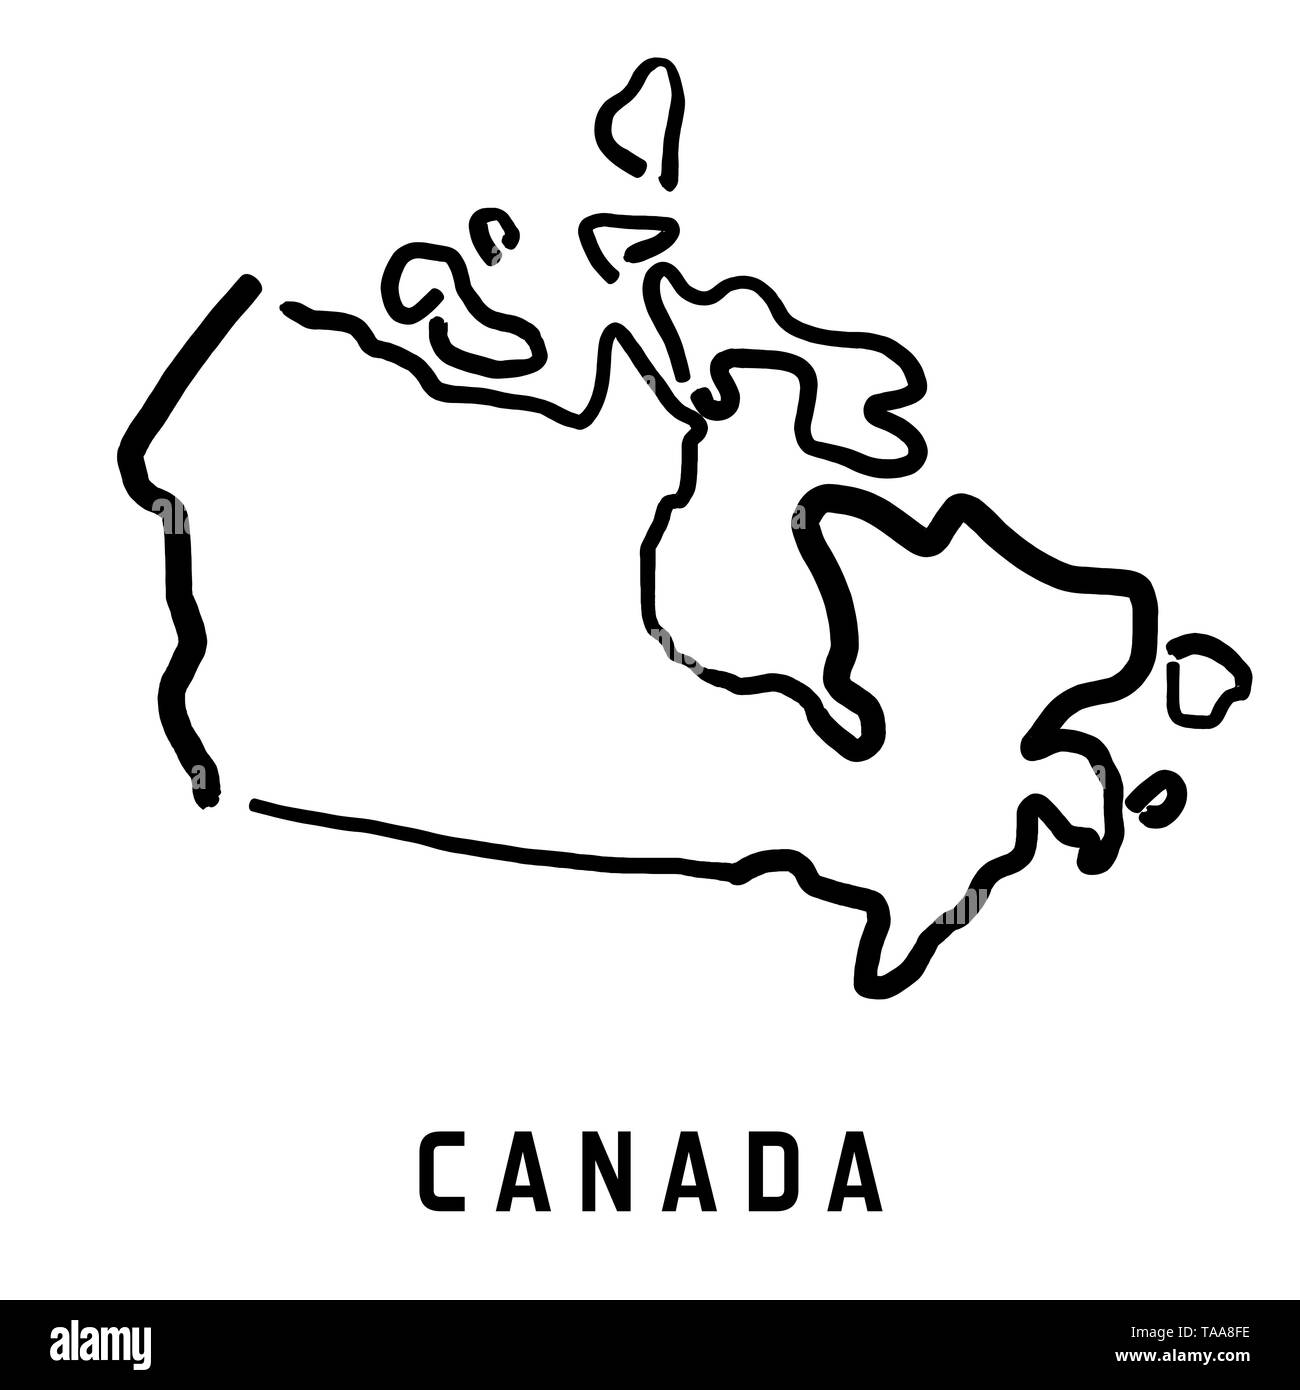 https://c8.alamy.com/comp/TAA8FE/canada-map-outline-smooth-simplified-country-shape-map-vector-TAA8FE.jpg